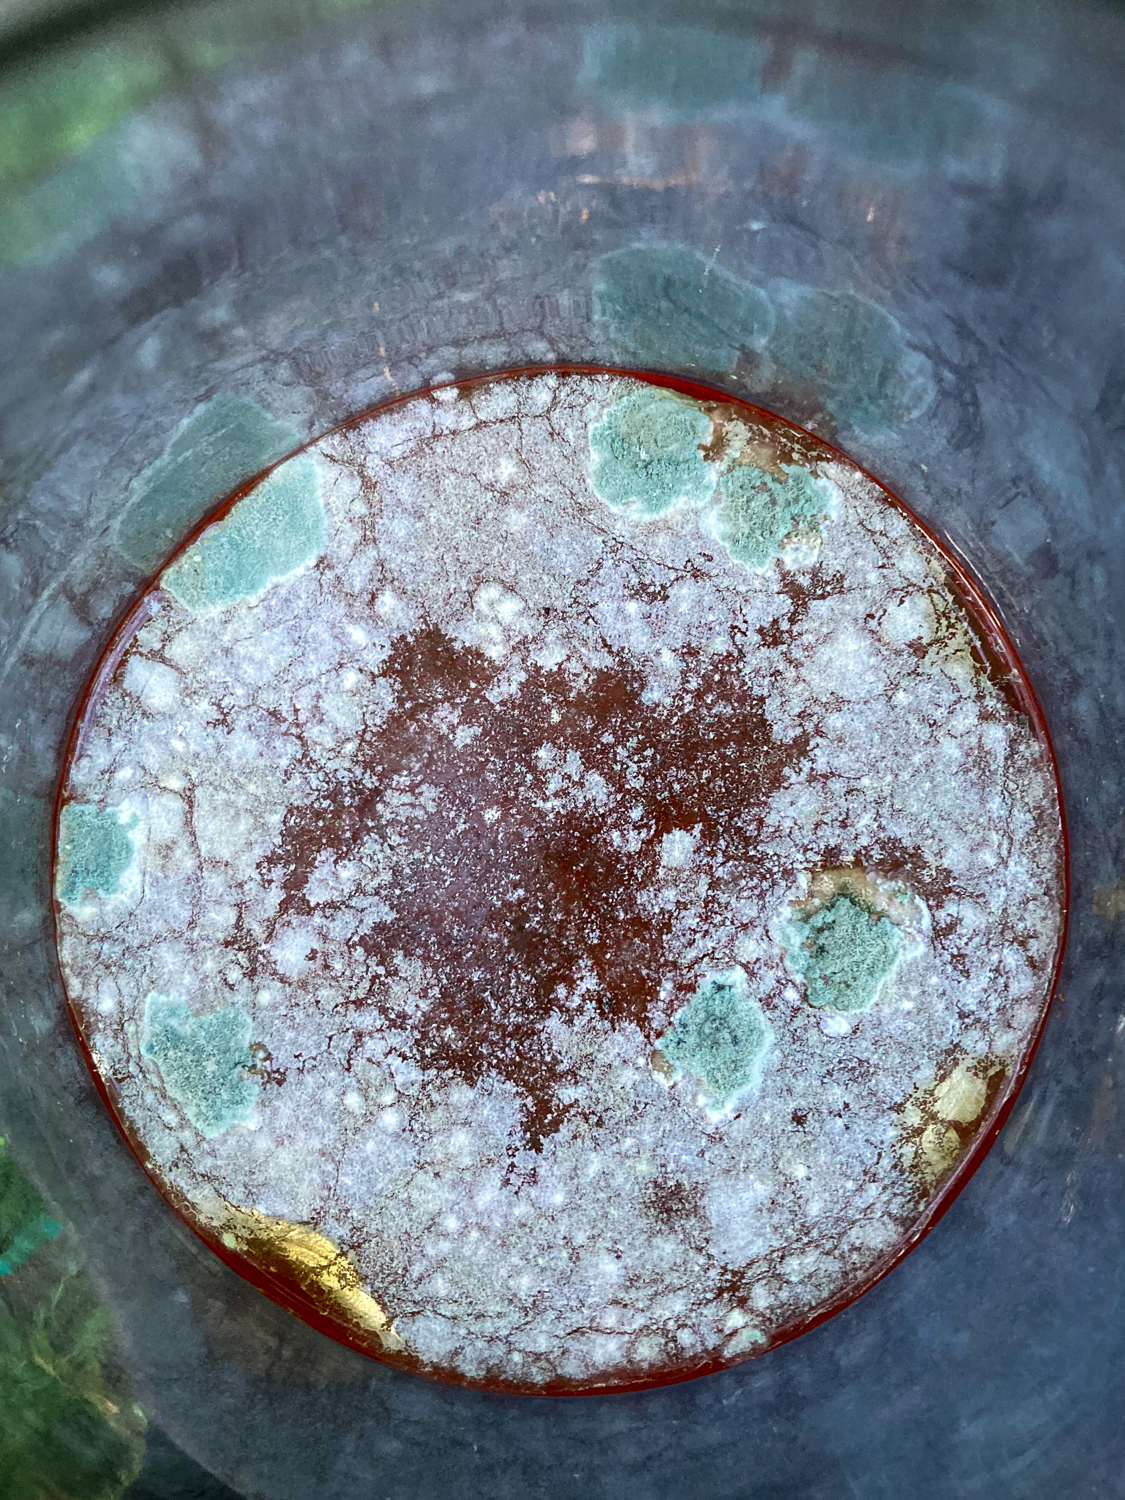 Green and white mould on the surface of yellow liquid